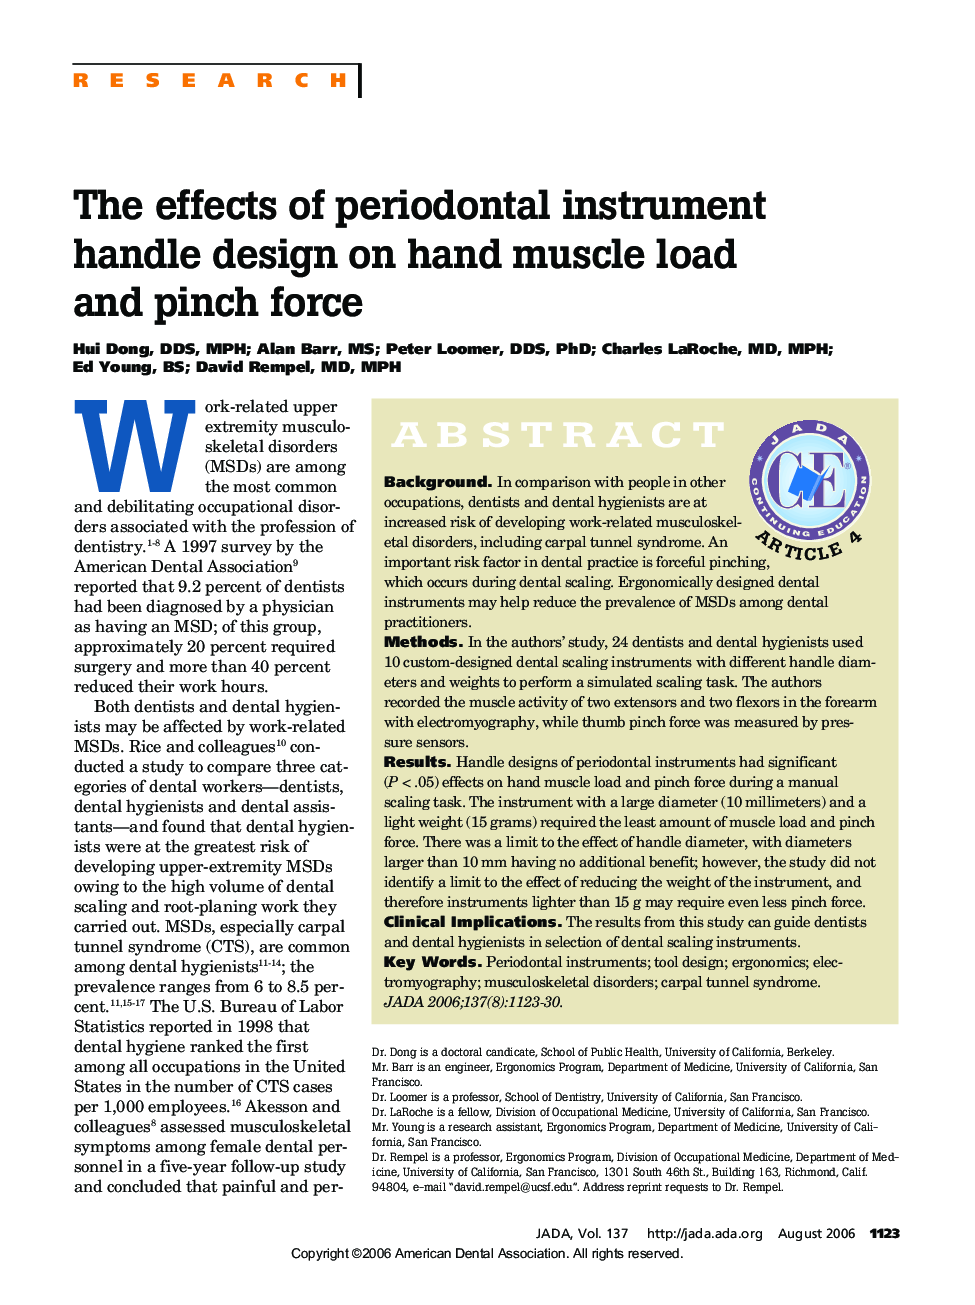 The effects of periodontal instrument handle design on hand muscle load and pinch force 